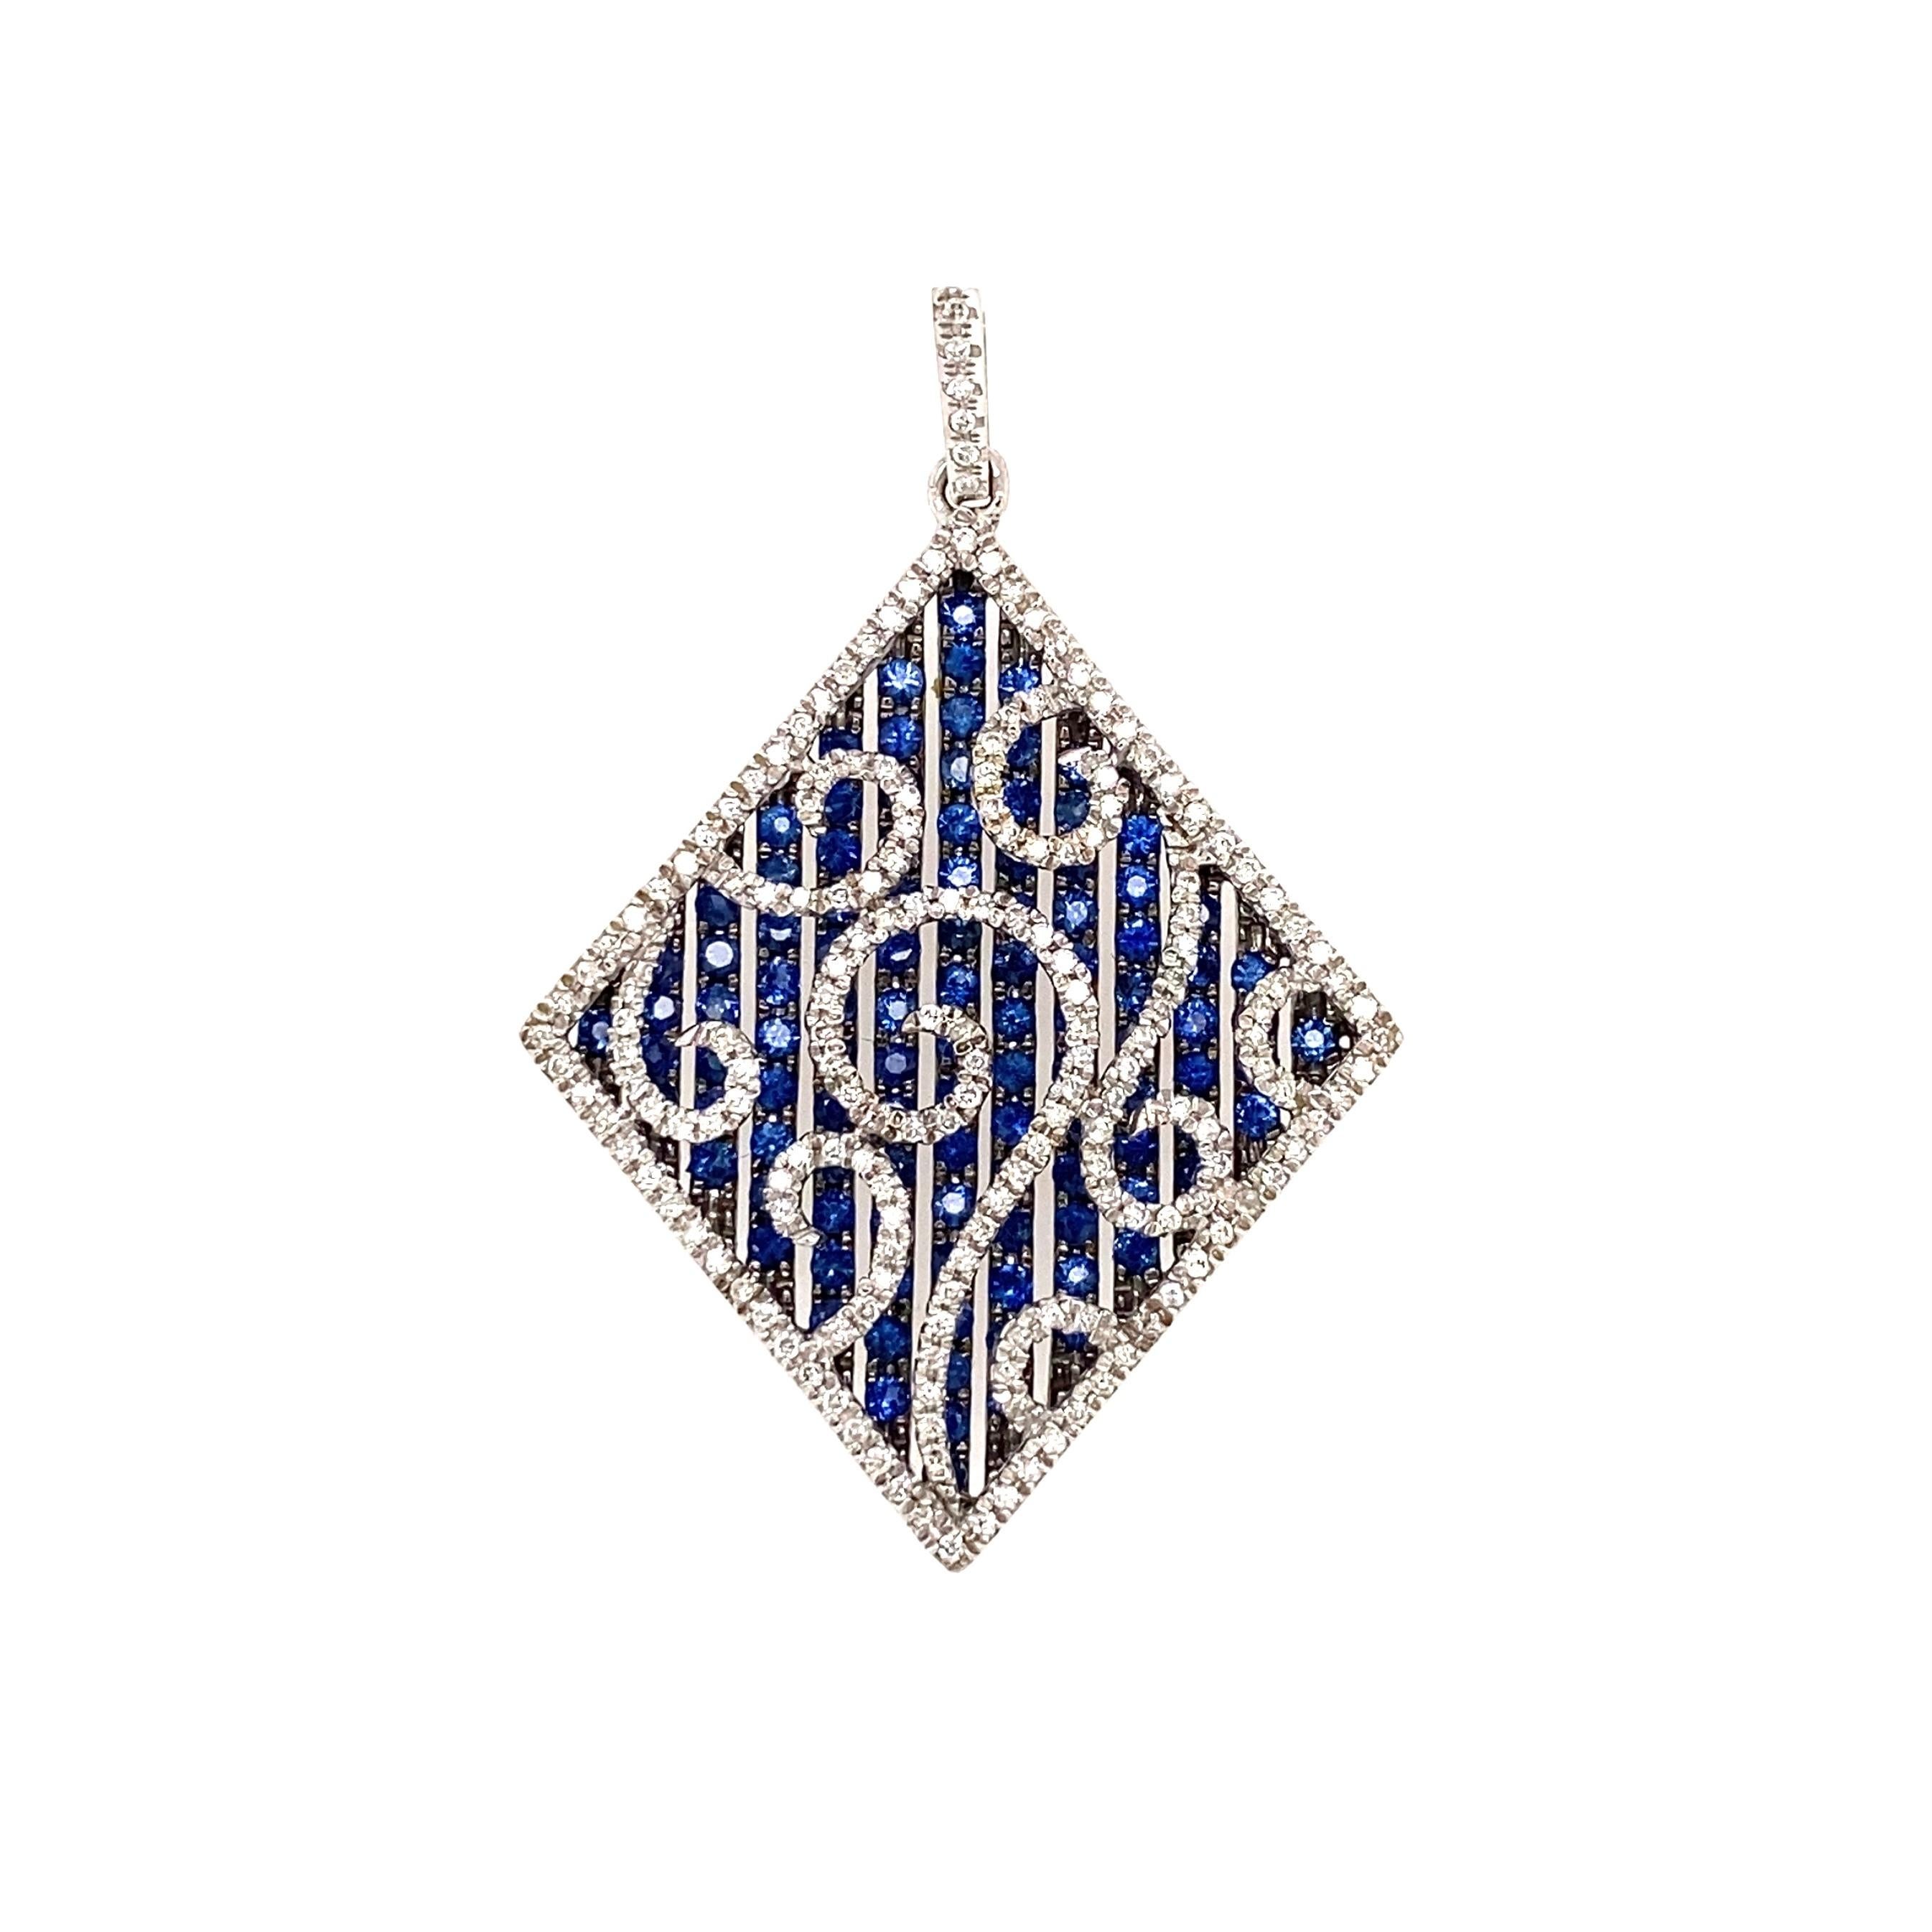 Simply Beautiful! Diamond and Sapphire Pendant. Pave Hand set Round Brilliant-cut Diamonds, weighing approx. 1tcw; H color, SI1-SI2, Clarity and Sapphires approx. 2tcw. Hand crafted 14K White Gold mounting. Pendant measures approx. 1.70” L x 1.25”